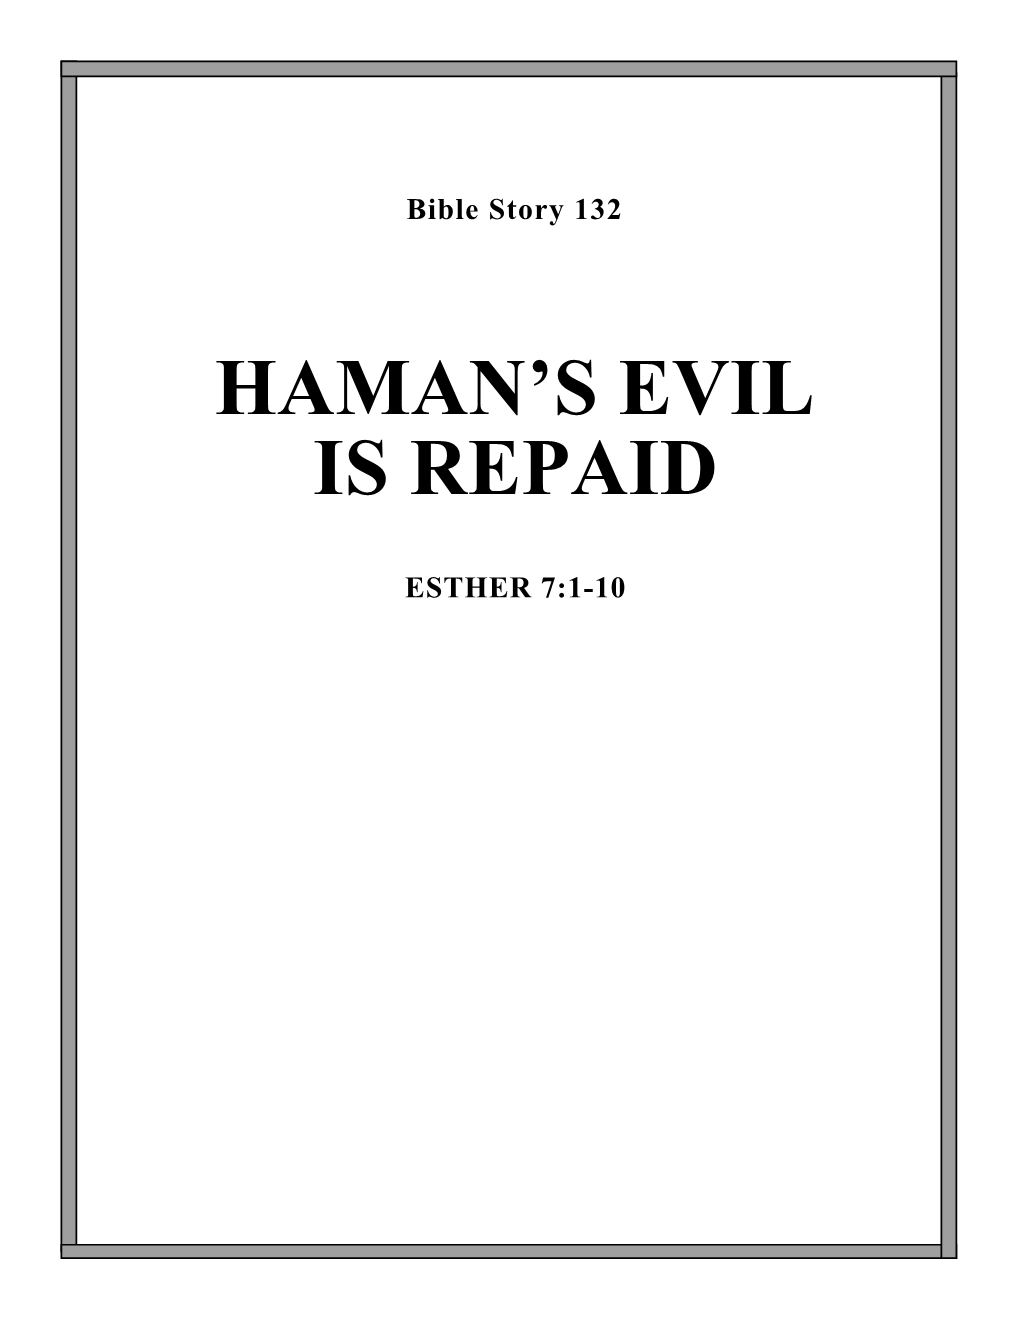 132. Haman's Evil Is Repaid (Esther 7:1-10)